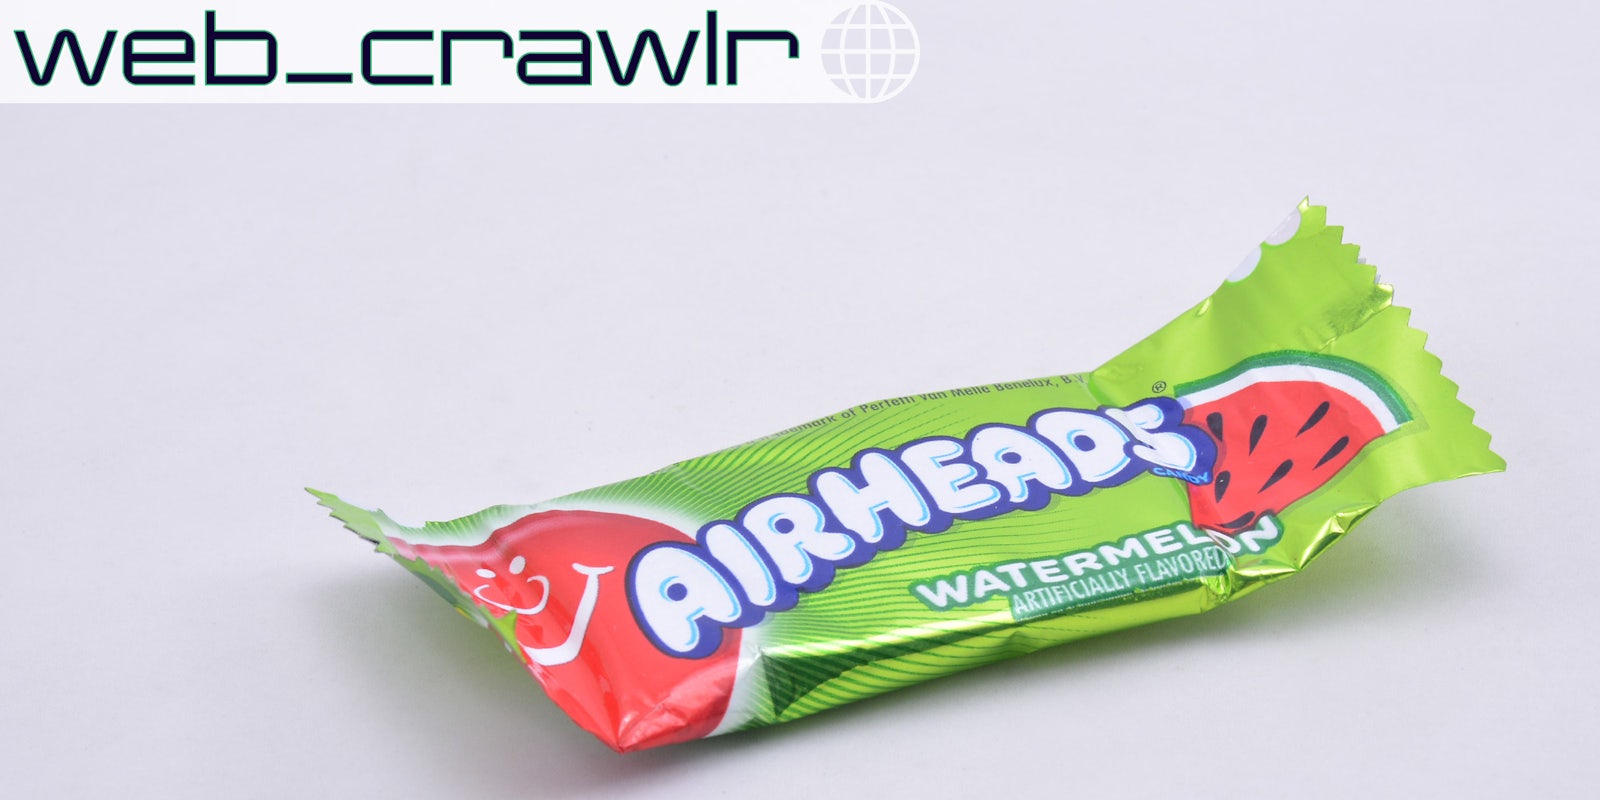 An Airheads candy. The Daily Dot newsletter web_crawlr logo is in the top left corner.